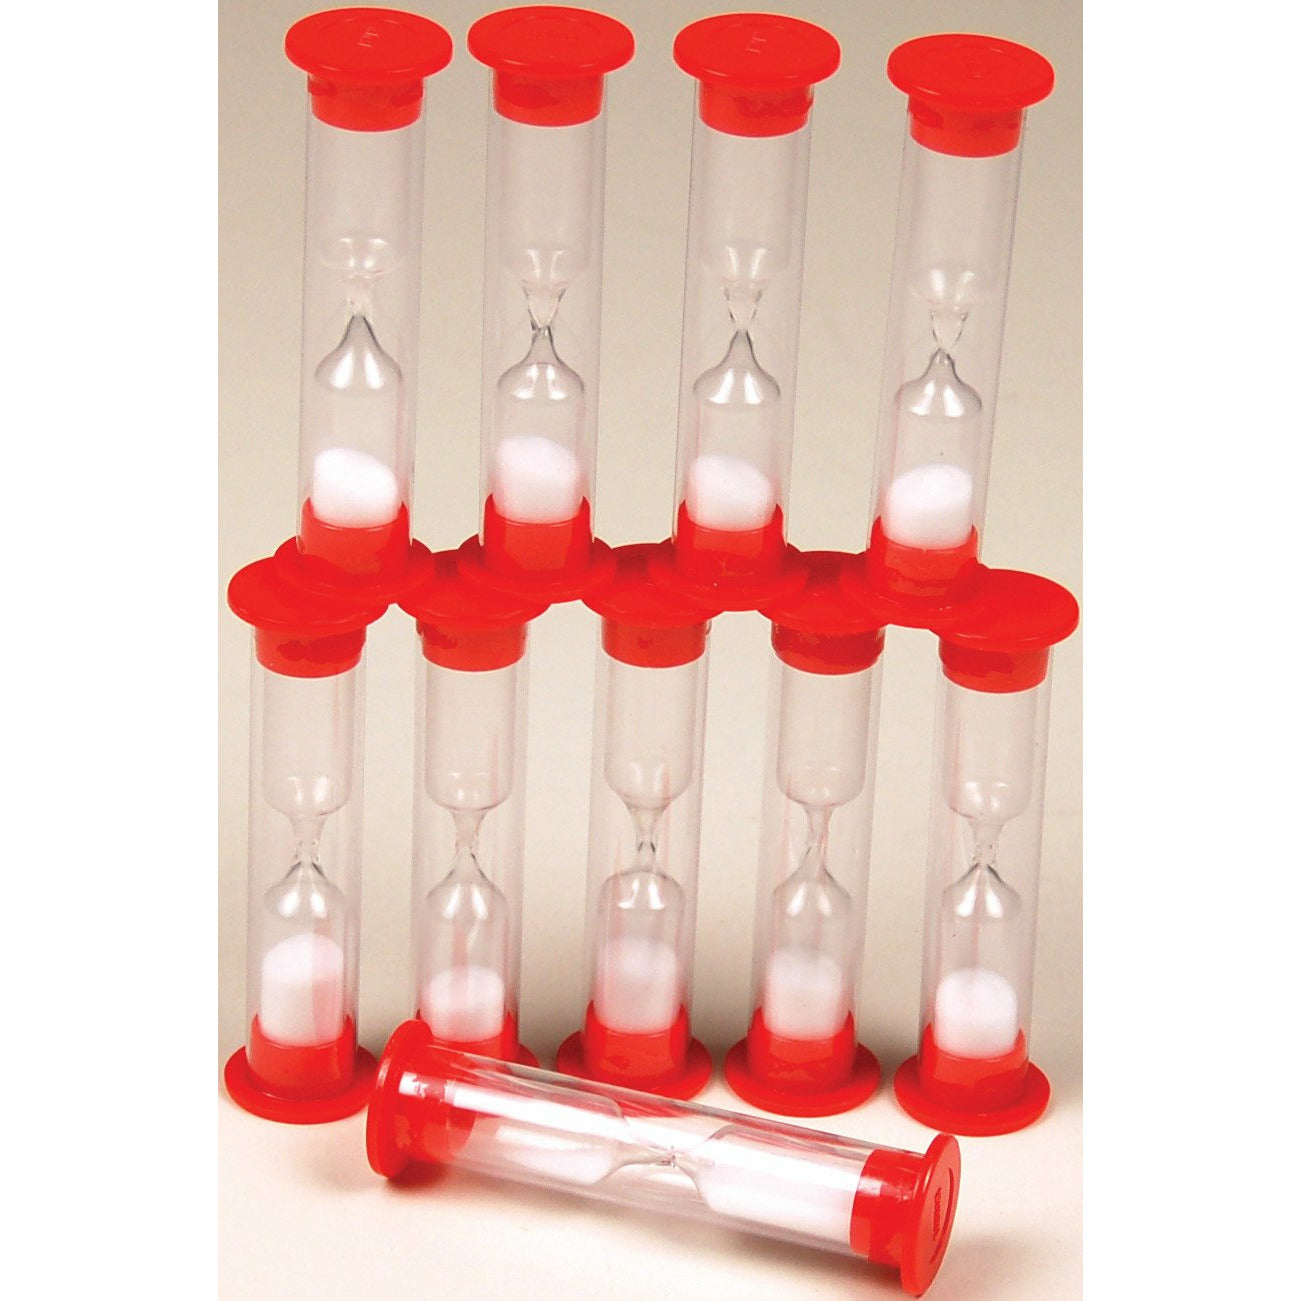 One Minute Sand Timer, Set of 10